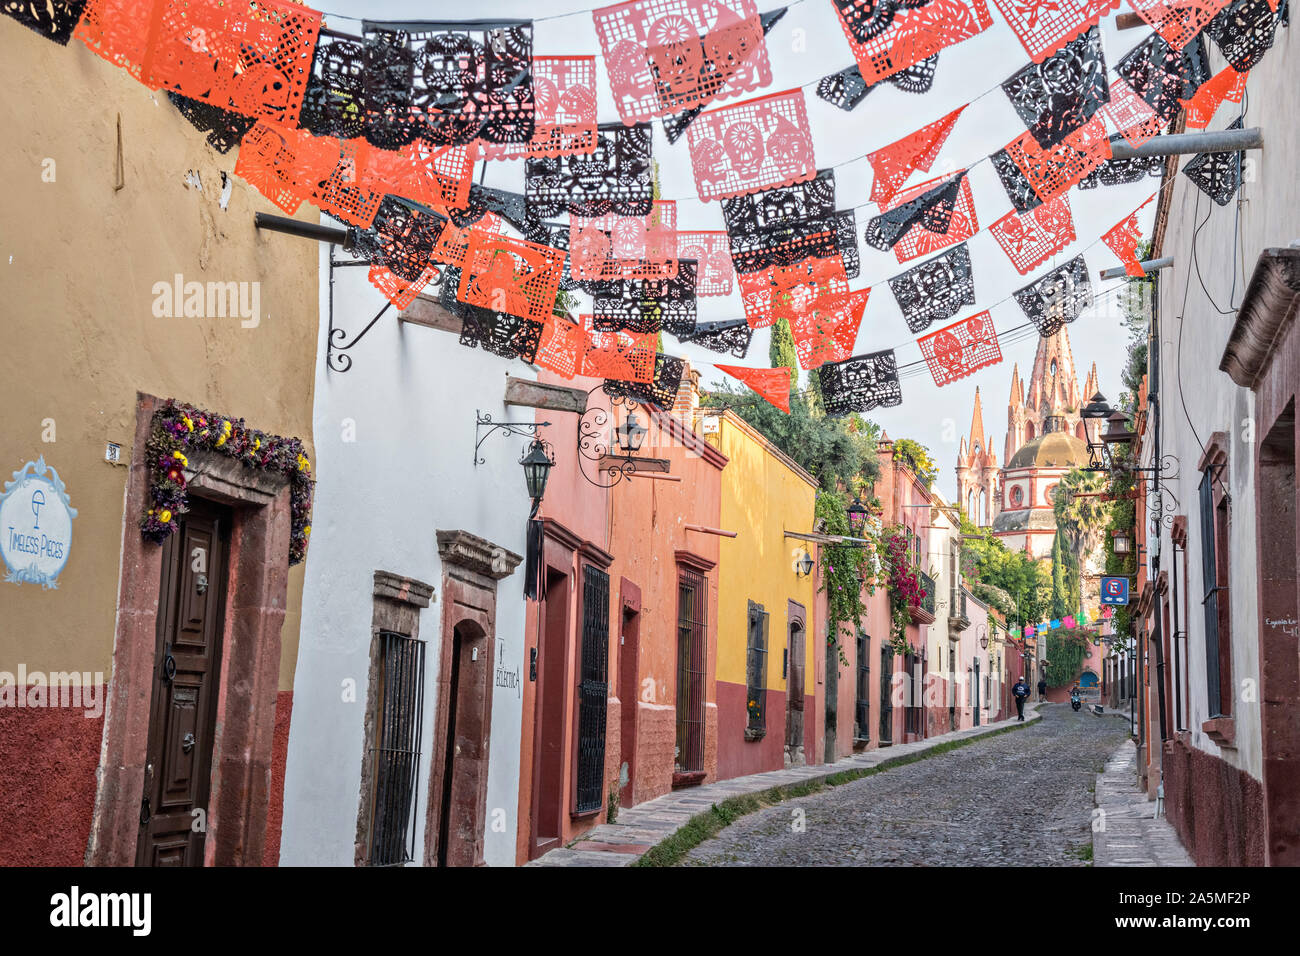 Domes and spires of the Parroquia San Miguel Arcangel church seen through paper banners called papel picado strung to celebrate the Day of the Dead festival on Aldama Street in the historic district of San Miguel de Allende, Mexico. Stock Photo